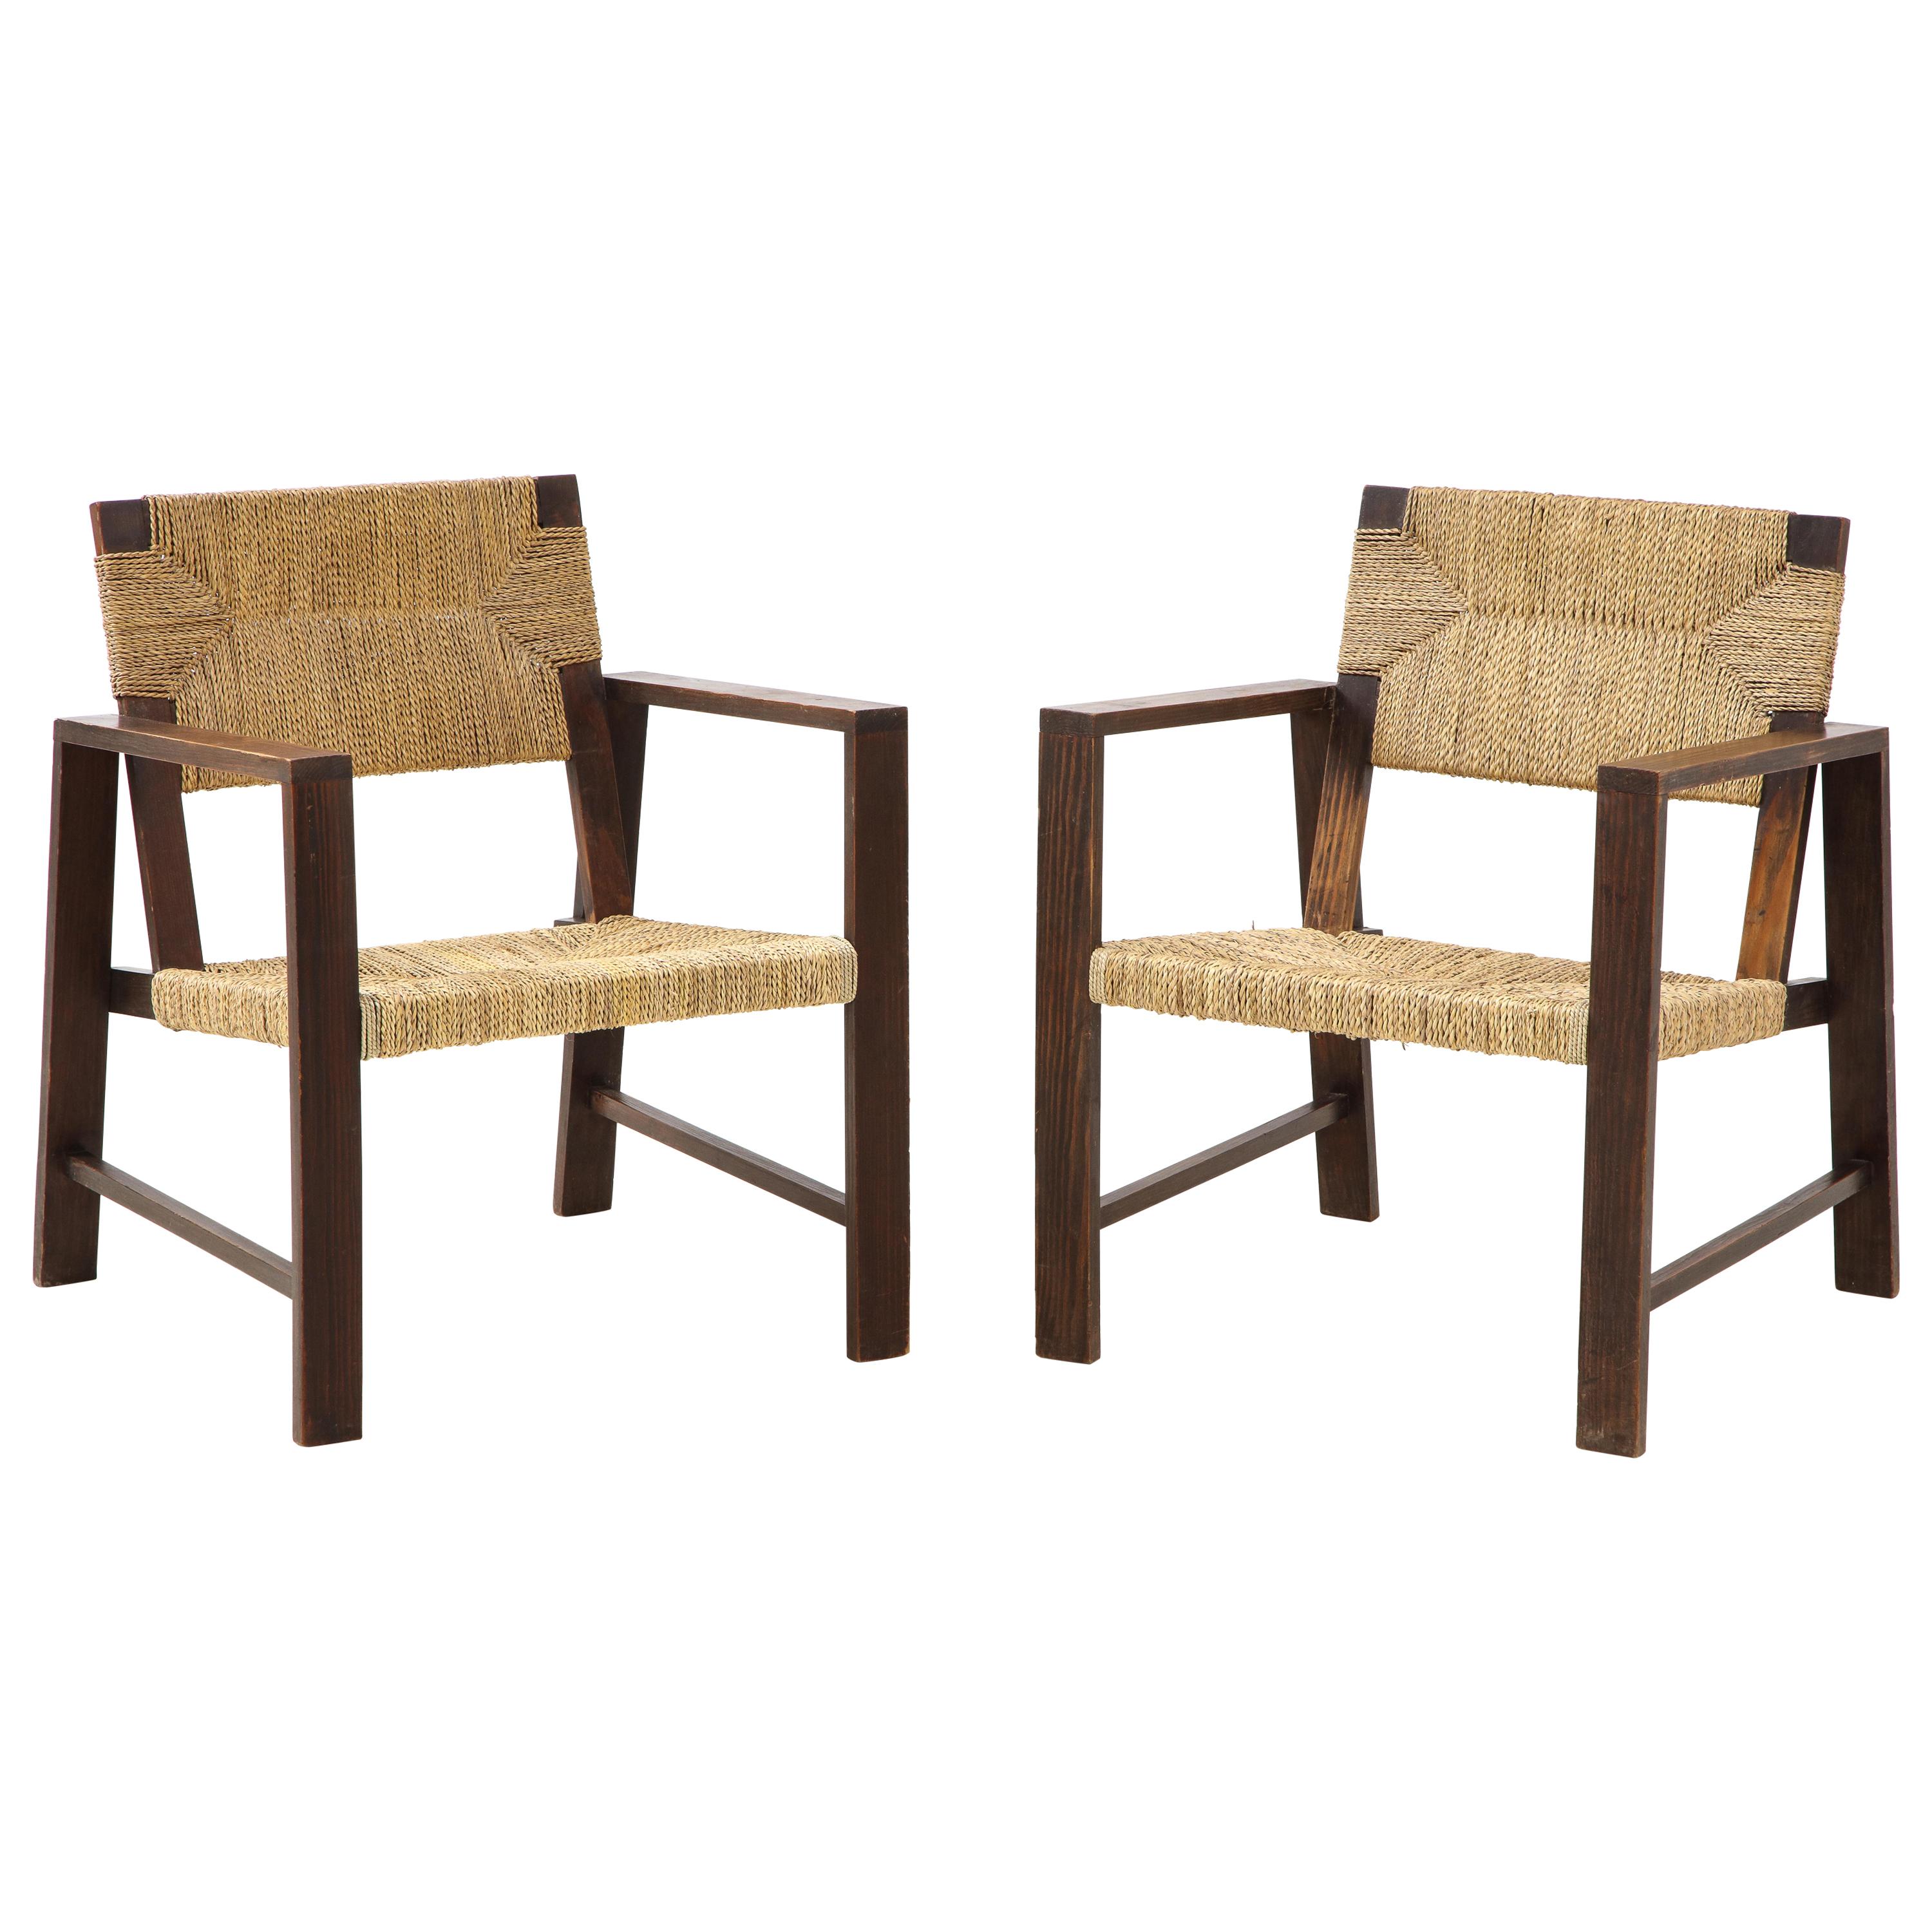 Pair of Rope Armchairs, France, circa 1925